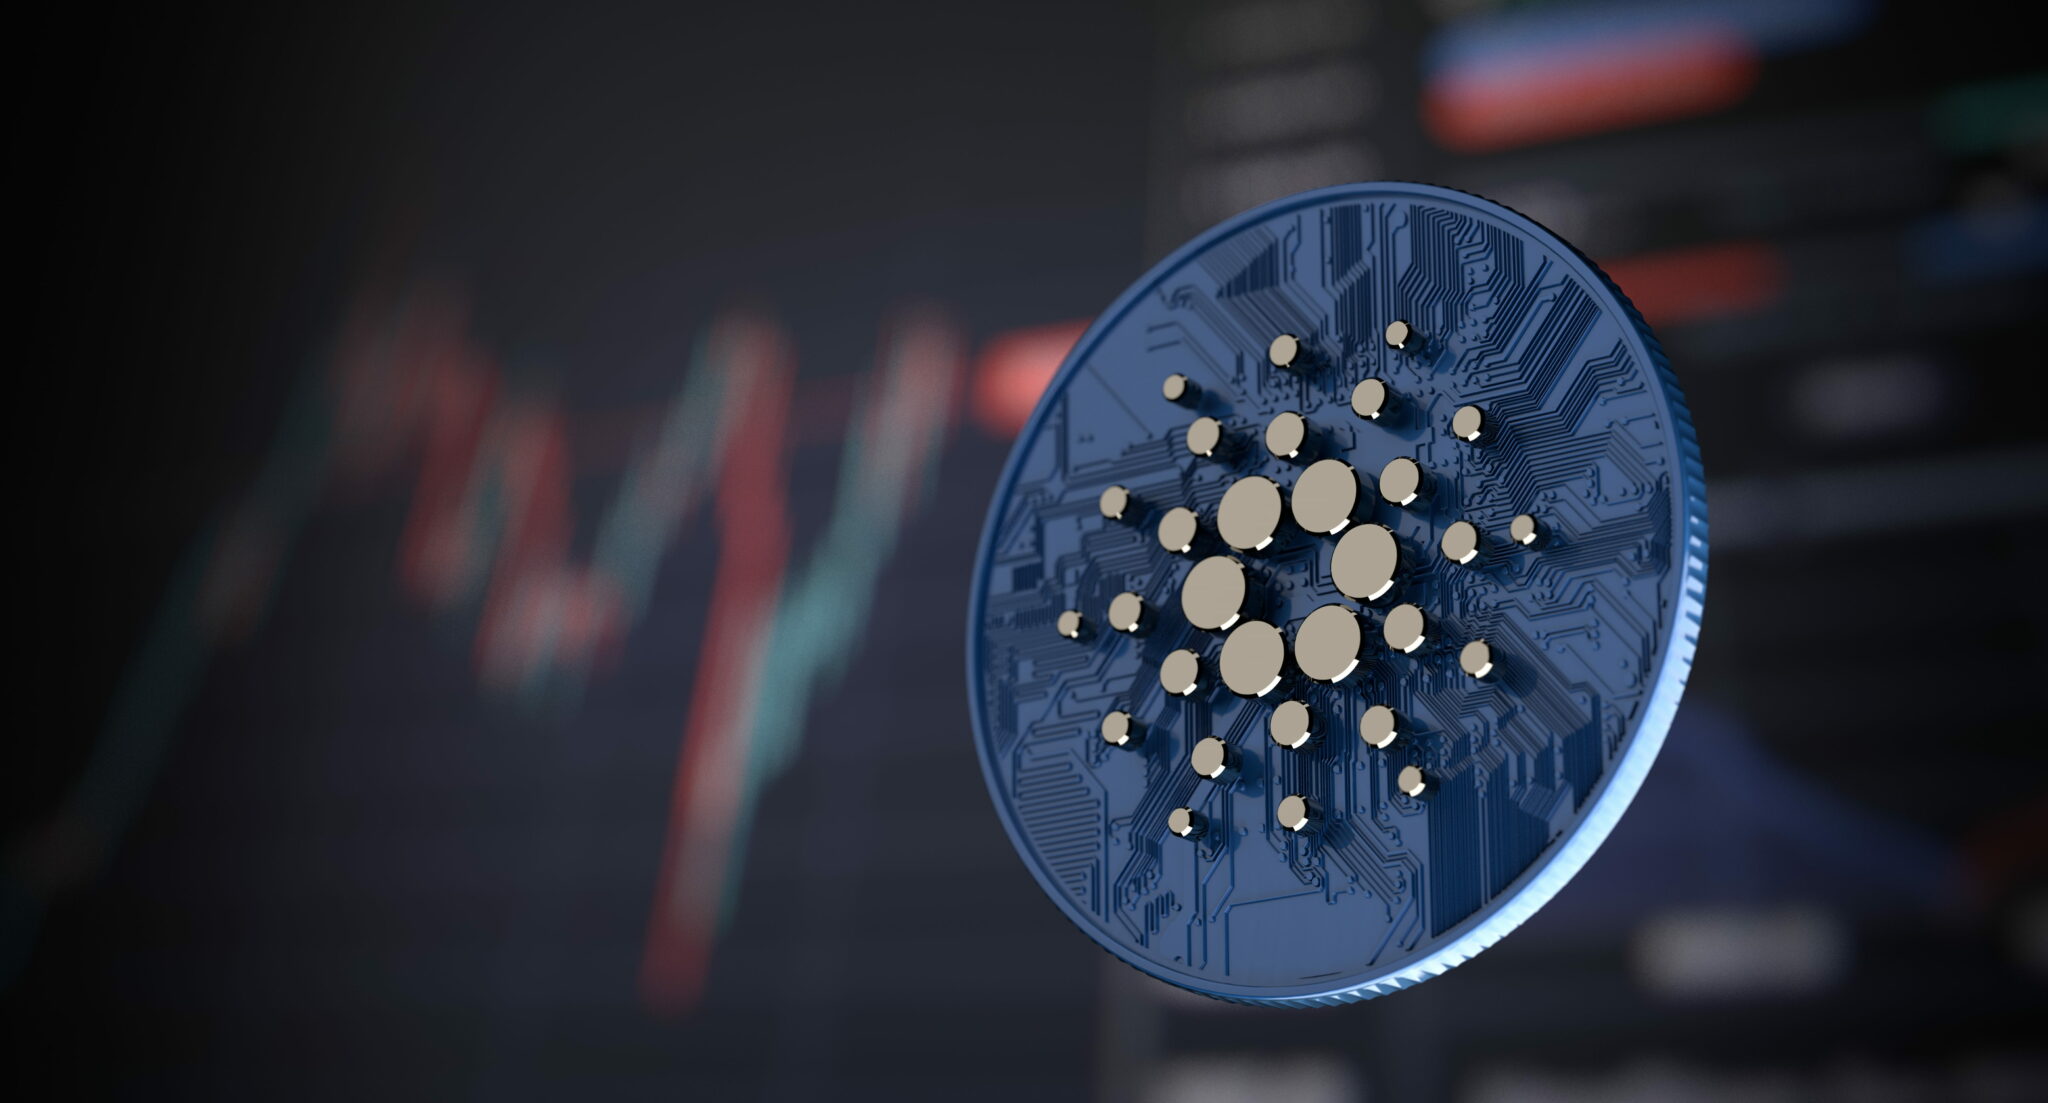 Cardano Sees 300% Increased Use in Smart Contracts in 2022